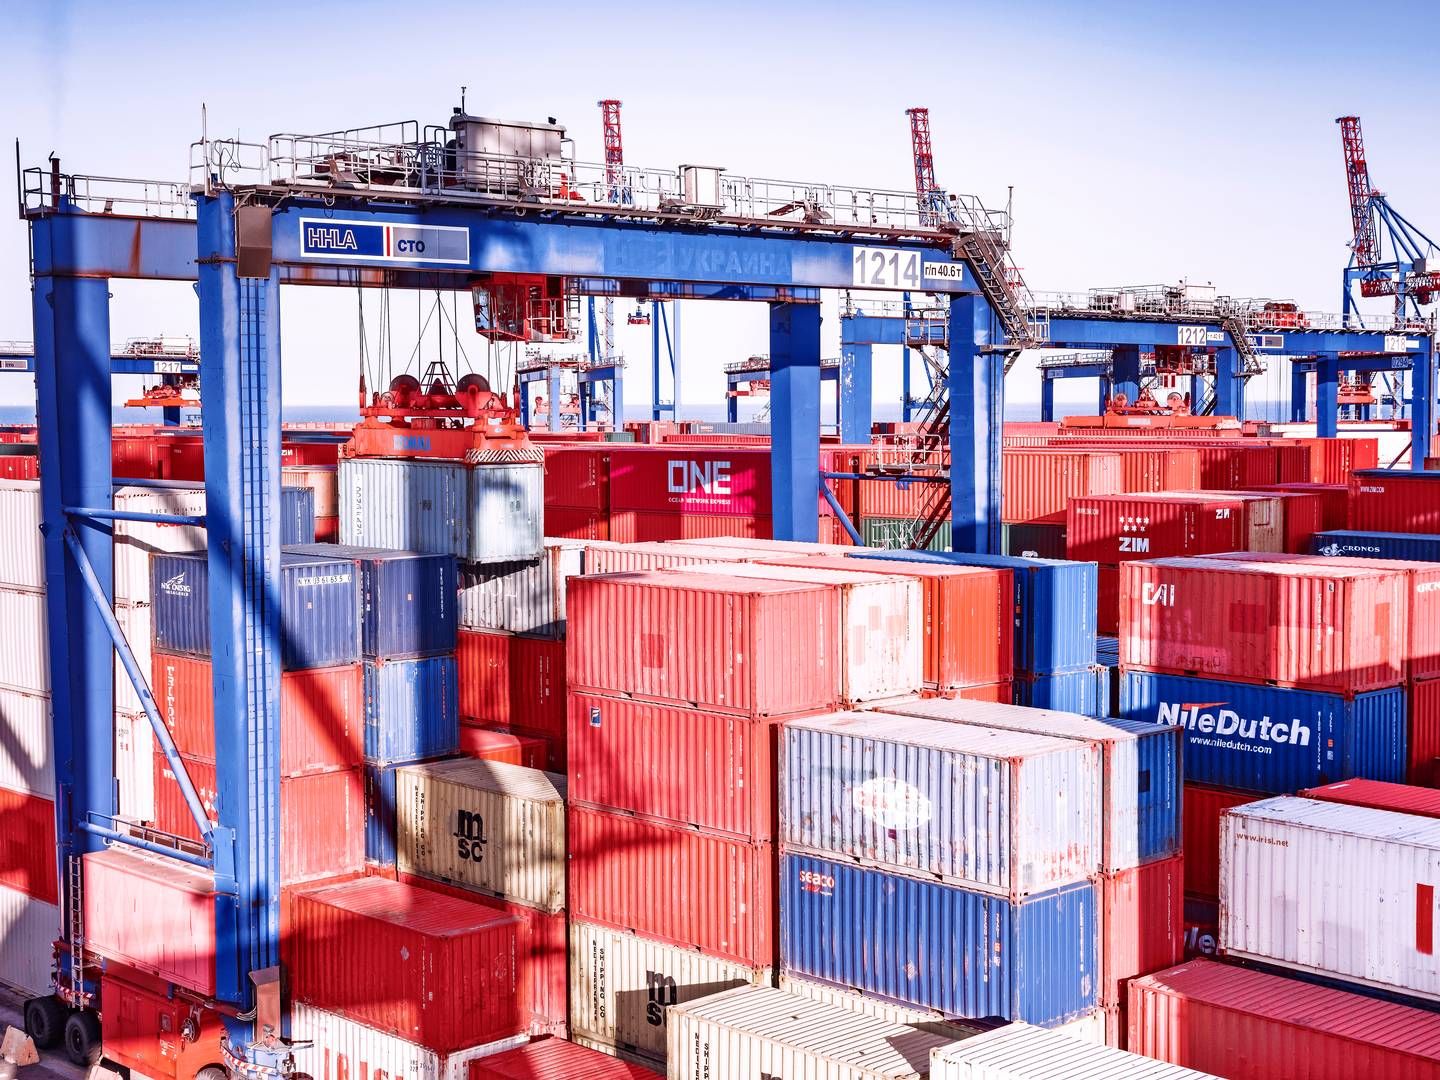 ICTSI handled 6.8 million containers in the first half of the year, which was nine percent more than last year, but only one percent more if you look at organic growth alone. | Photo: Pr-foto: Hhla / Thies Rätzke